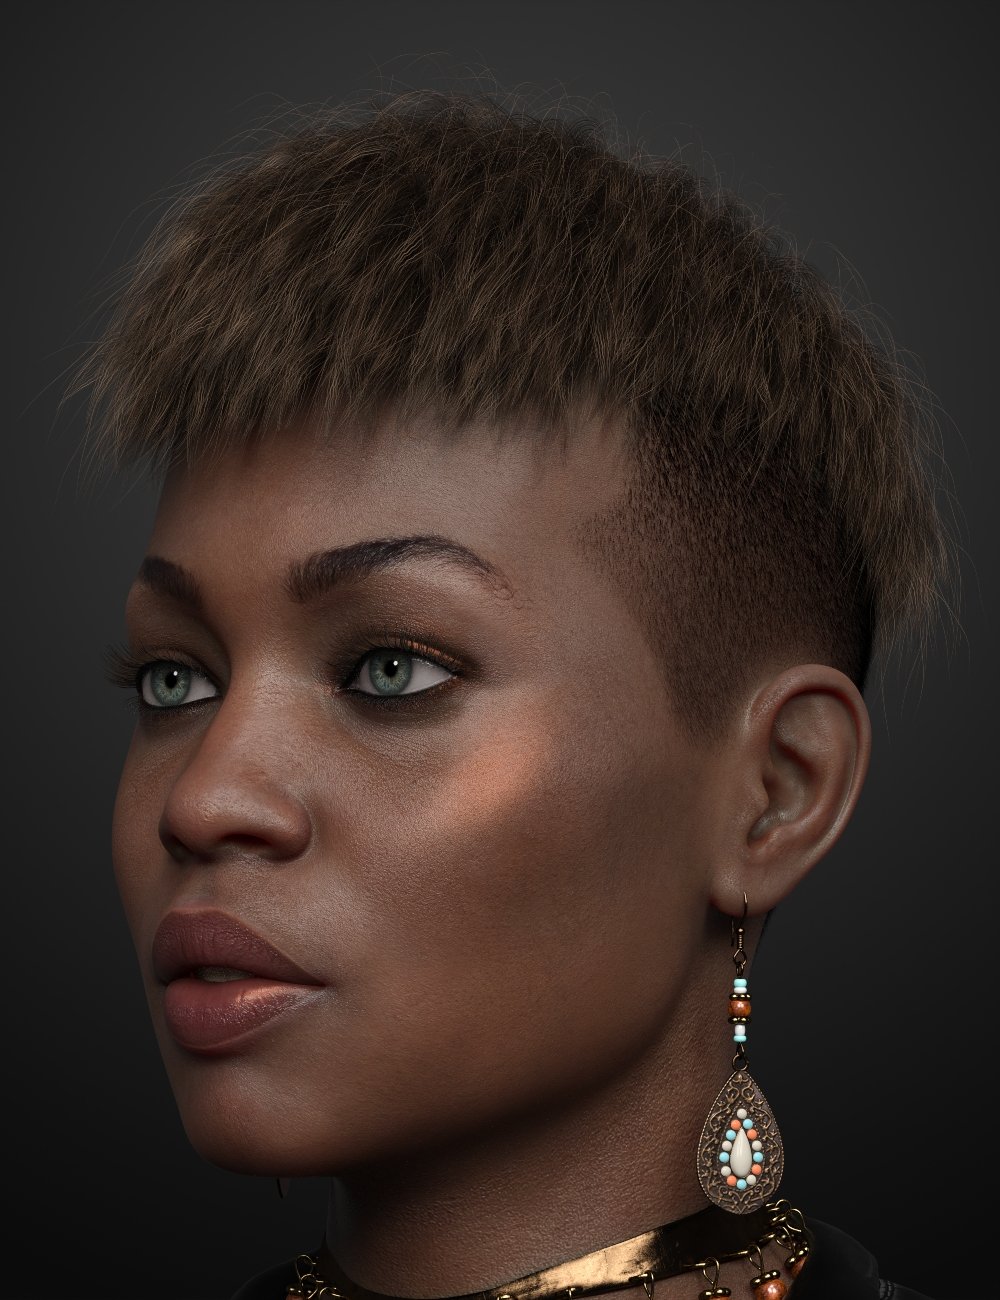 Short Undercut Hair for Genesis 3, 8, and 8.1 Males and Females by: Soto, 3D Models by Daz 3D